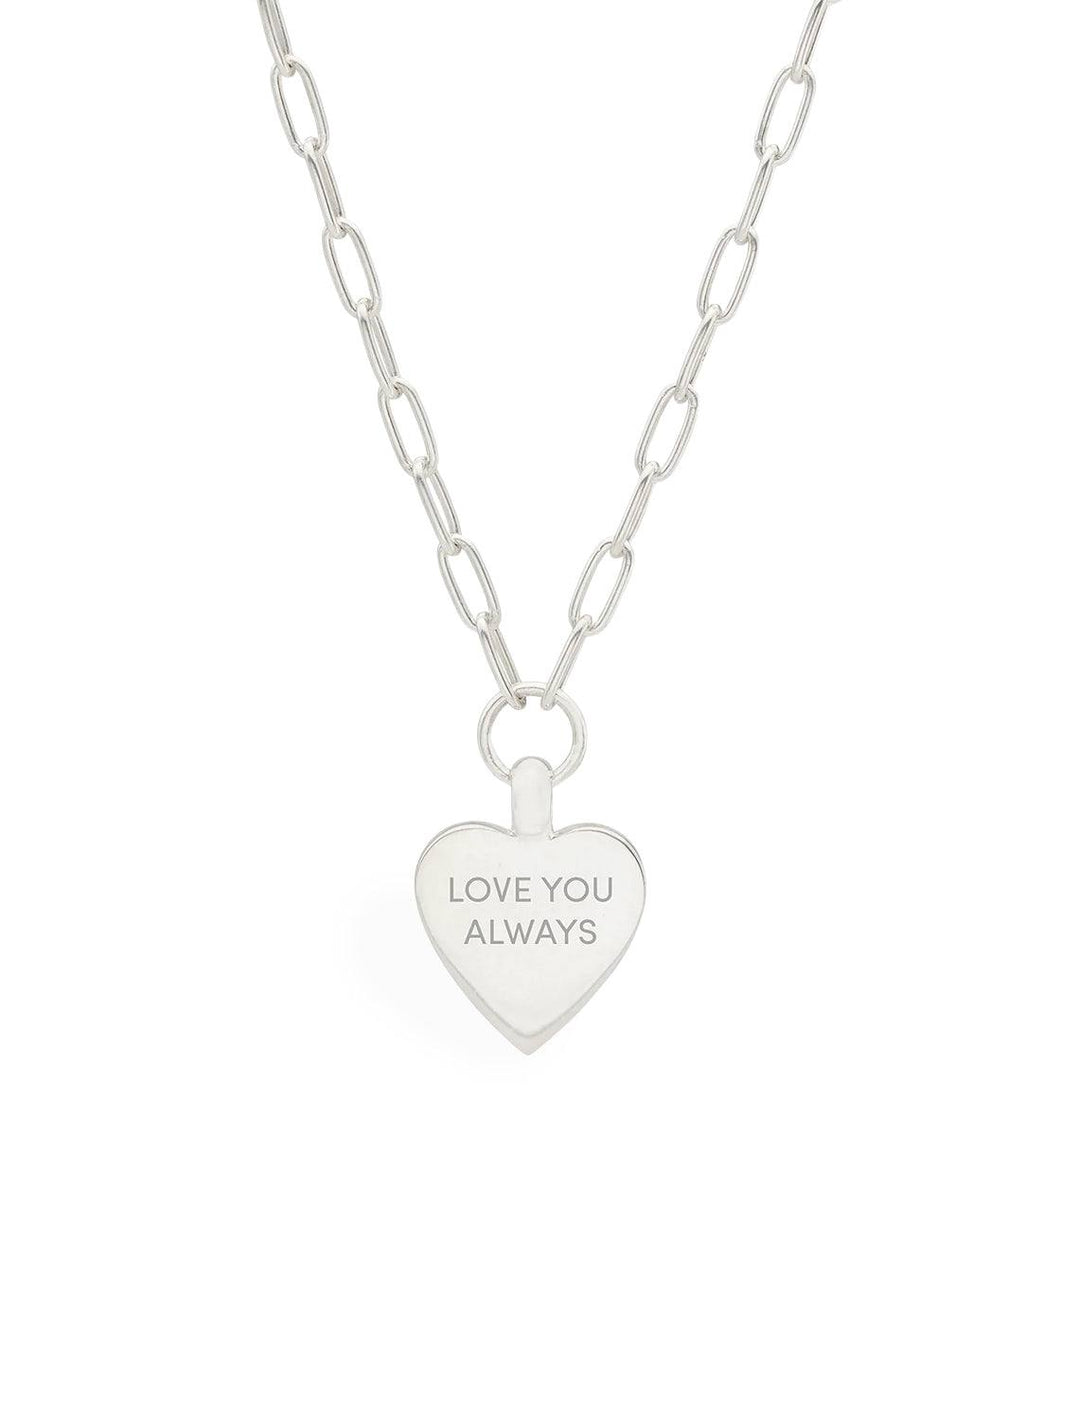 Back view of Anna Beck's Medium Heart Necklace in Silver. Heart is engraved with the phrase "LOVE YOU ALWAYS"